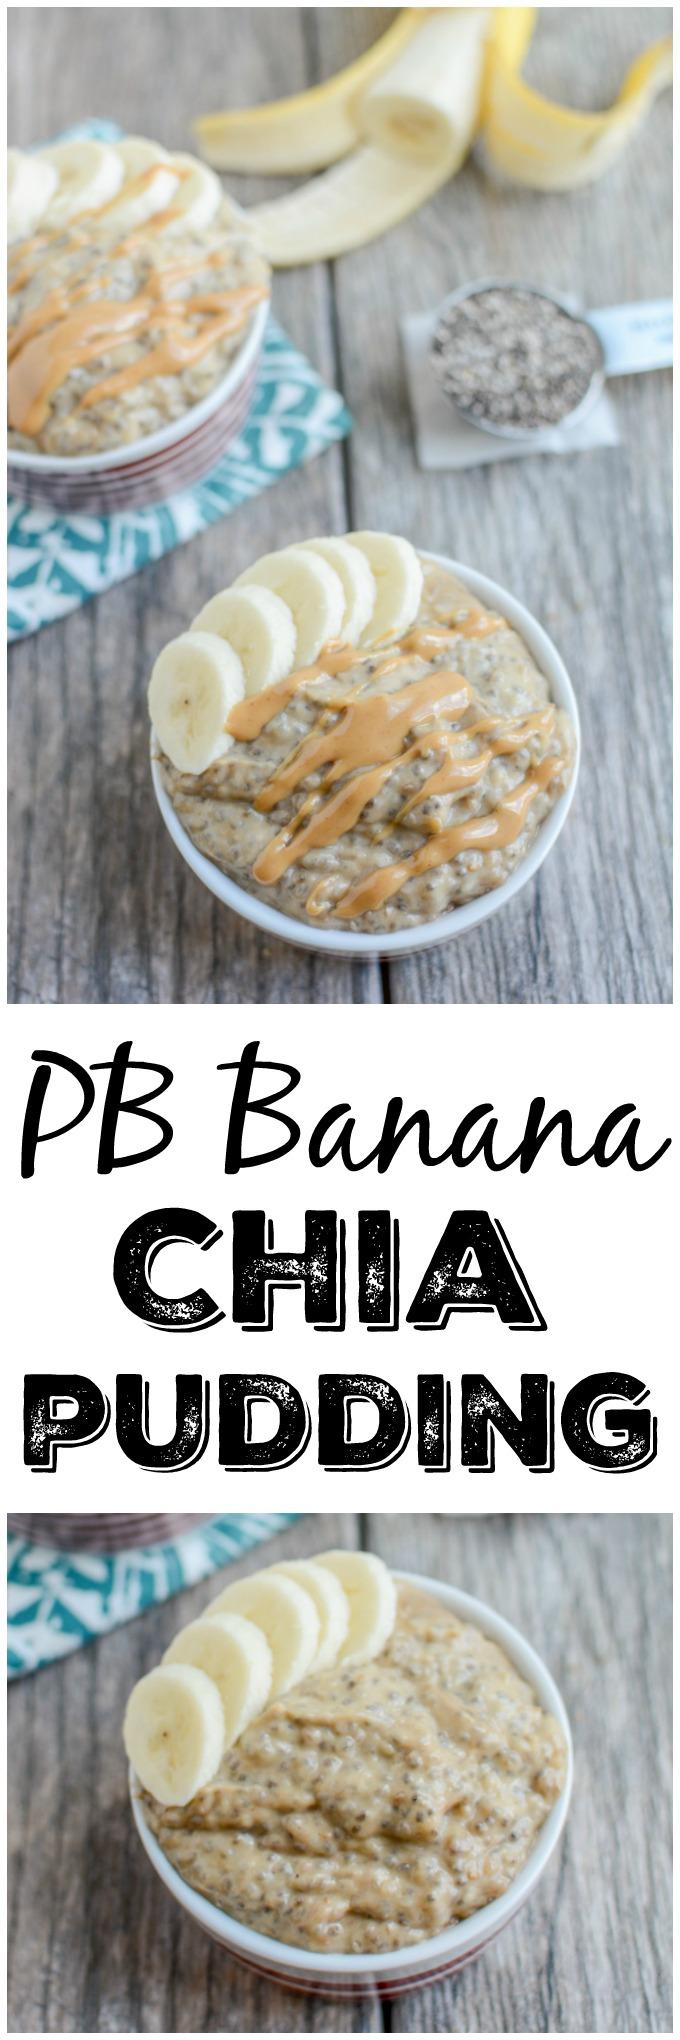 This four-ingredient Peanut Butter Banana Chia Pudding makes an easy, kid-friendly snack. It's packed with protein and healthy fats and is easy to prep ahead of time.